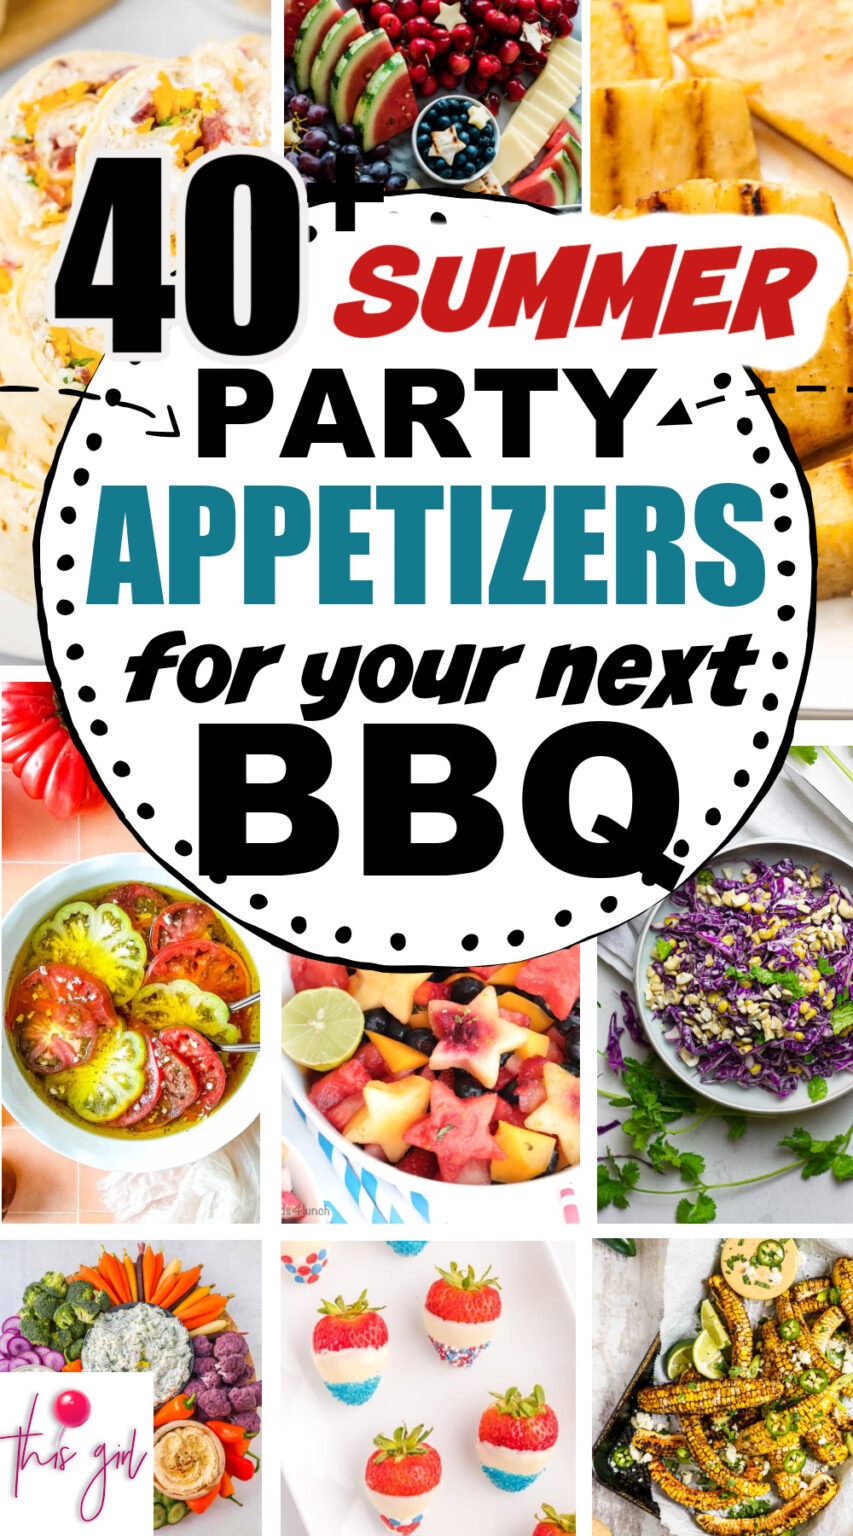 Summer Party Appetizers for BBQ to Please a Crowd